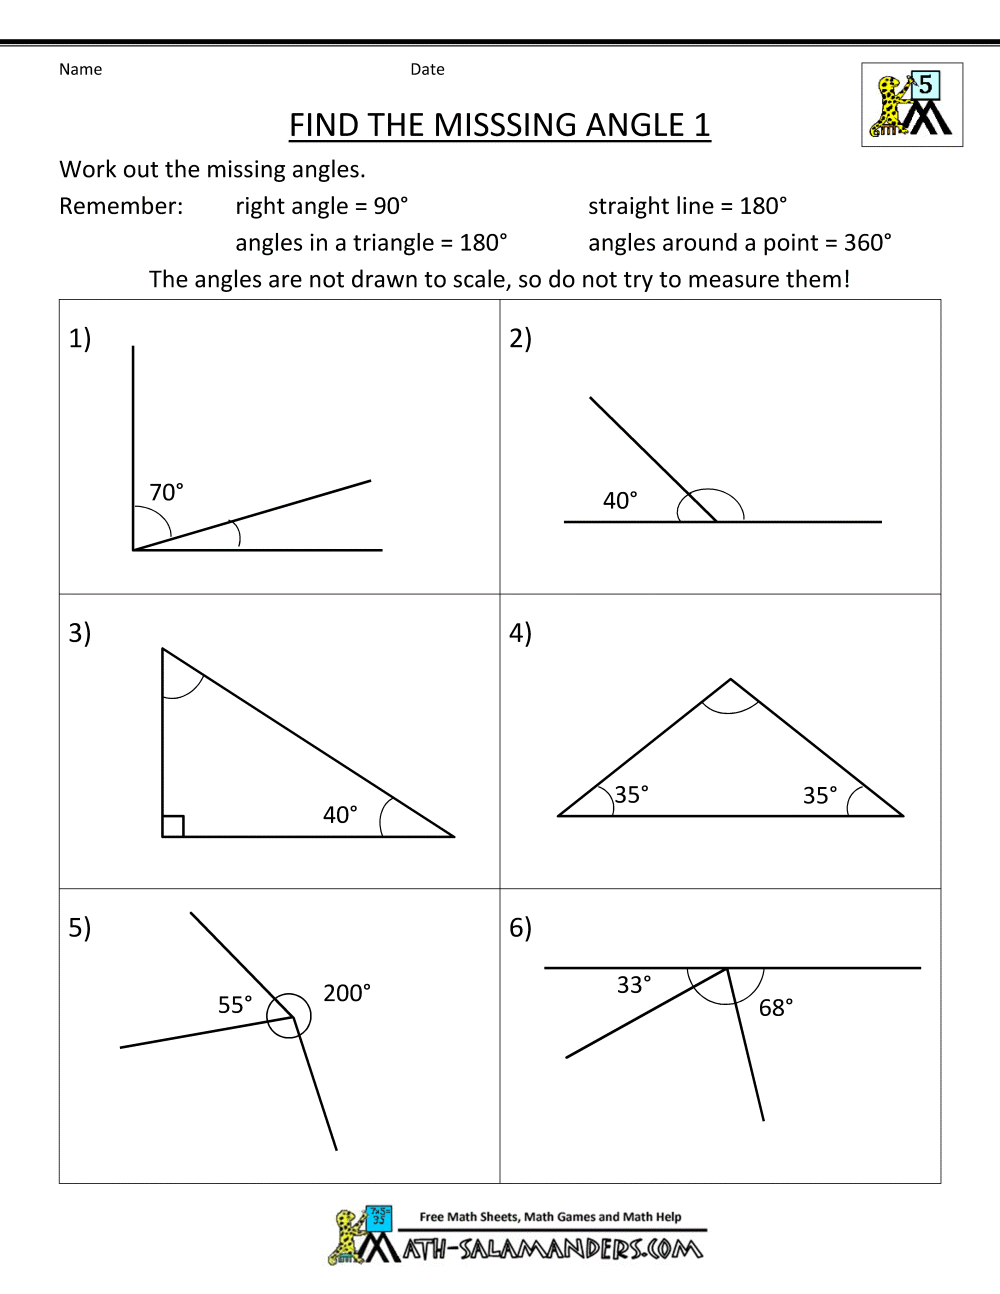 printables-finding-missing-angles-in-triangles-worksheet-tempojs